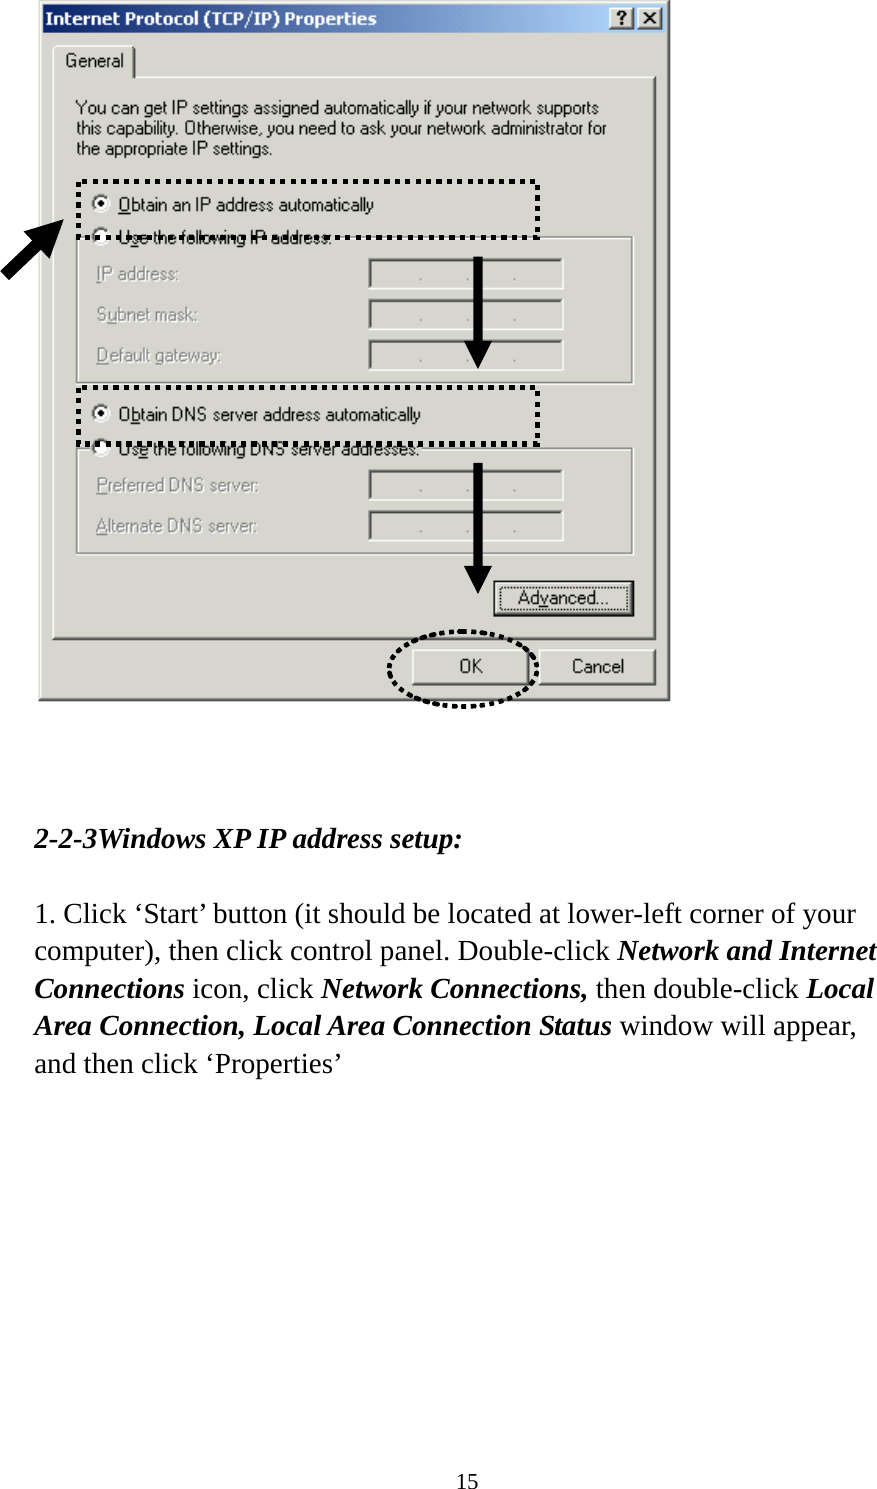 15     2-2-3Windows XP IP address setup:  1. Click ‘Start’ button (it should be located at lower-left corner of your computer), then click control panel. Double-click Network and Internet Connections icon, click Network Connections, then double-click Local Area Connection, Local Area Connection Status window will appear, and then click ‘Properties’  